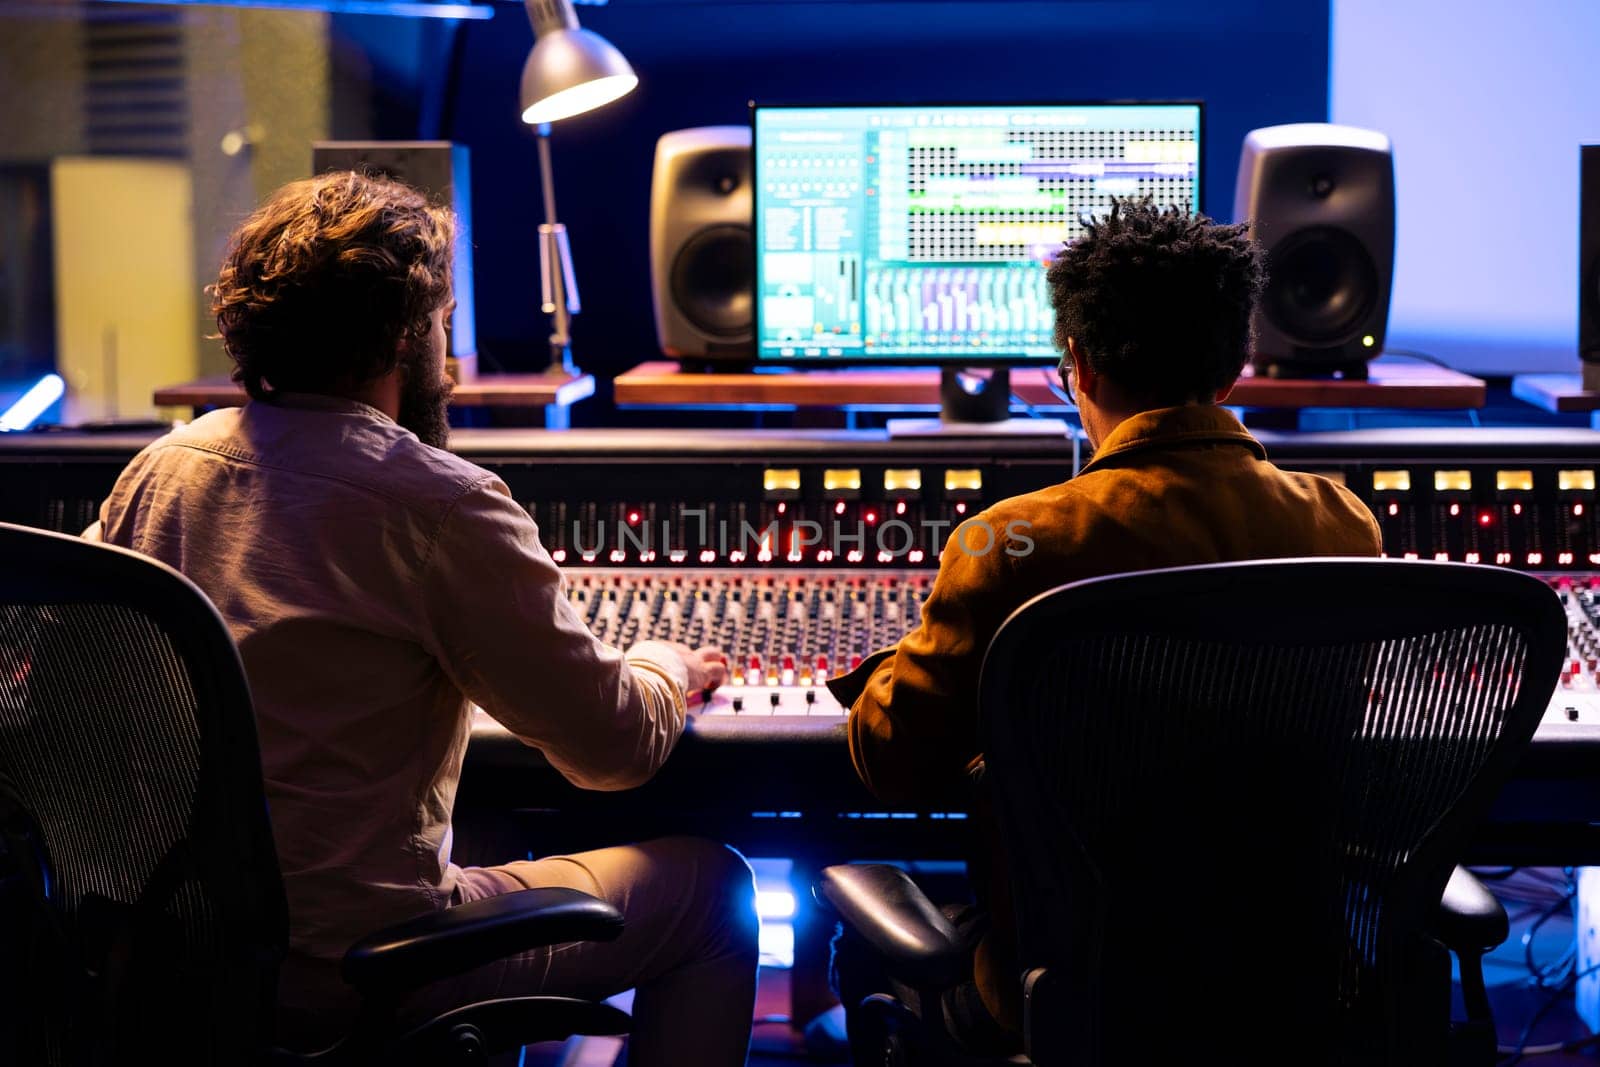 Singer and producer working together in professional music studio by DCStudio